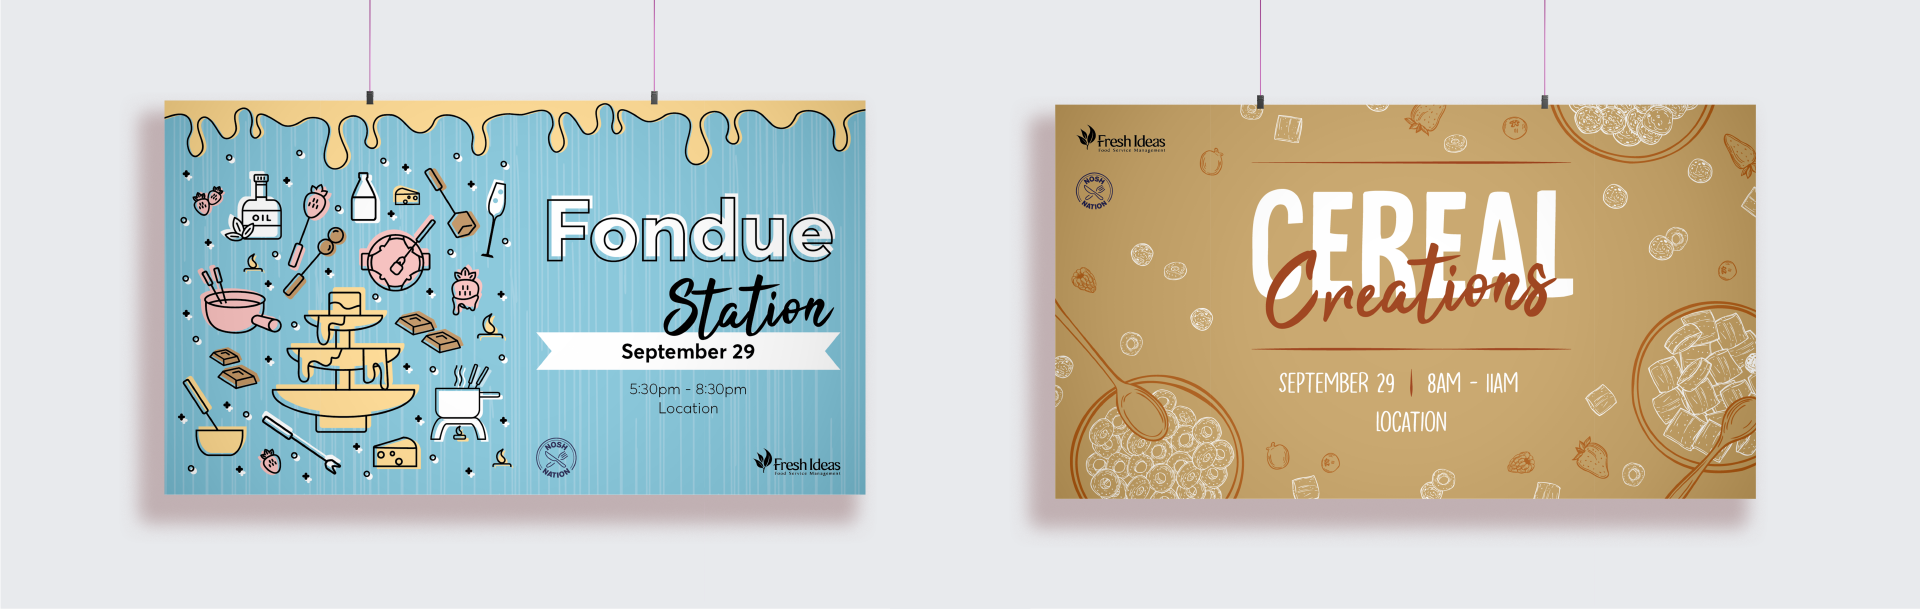 2 horizontal food event posters. One advertising a fondue station, the other a cereal bar.